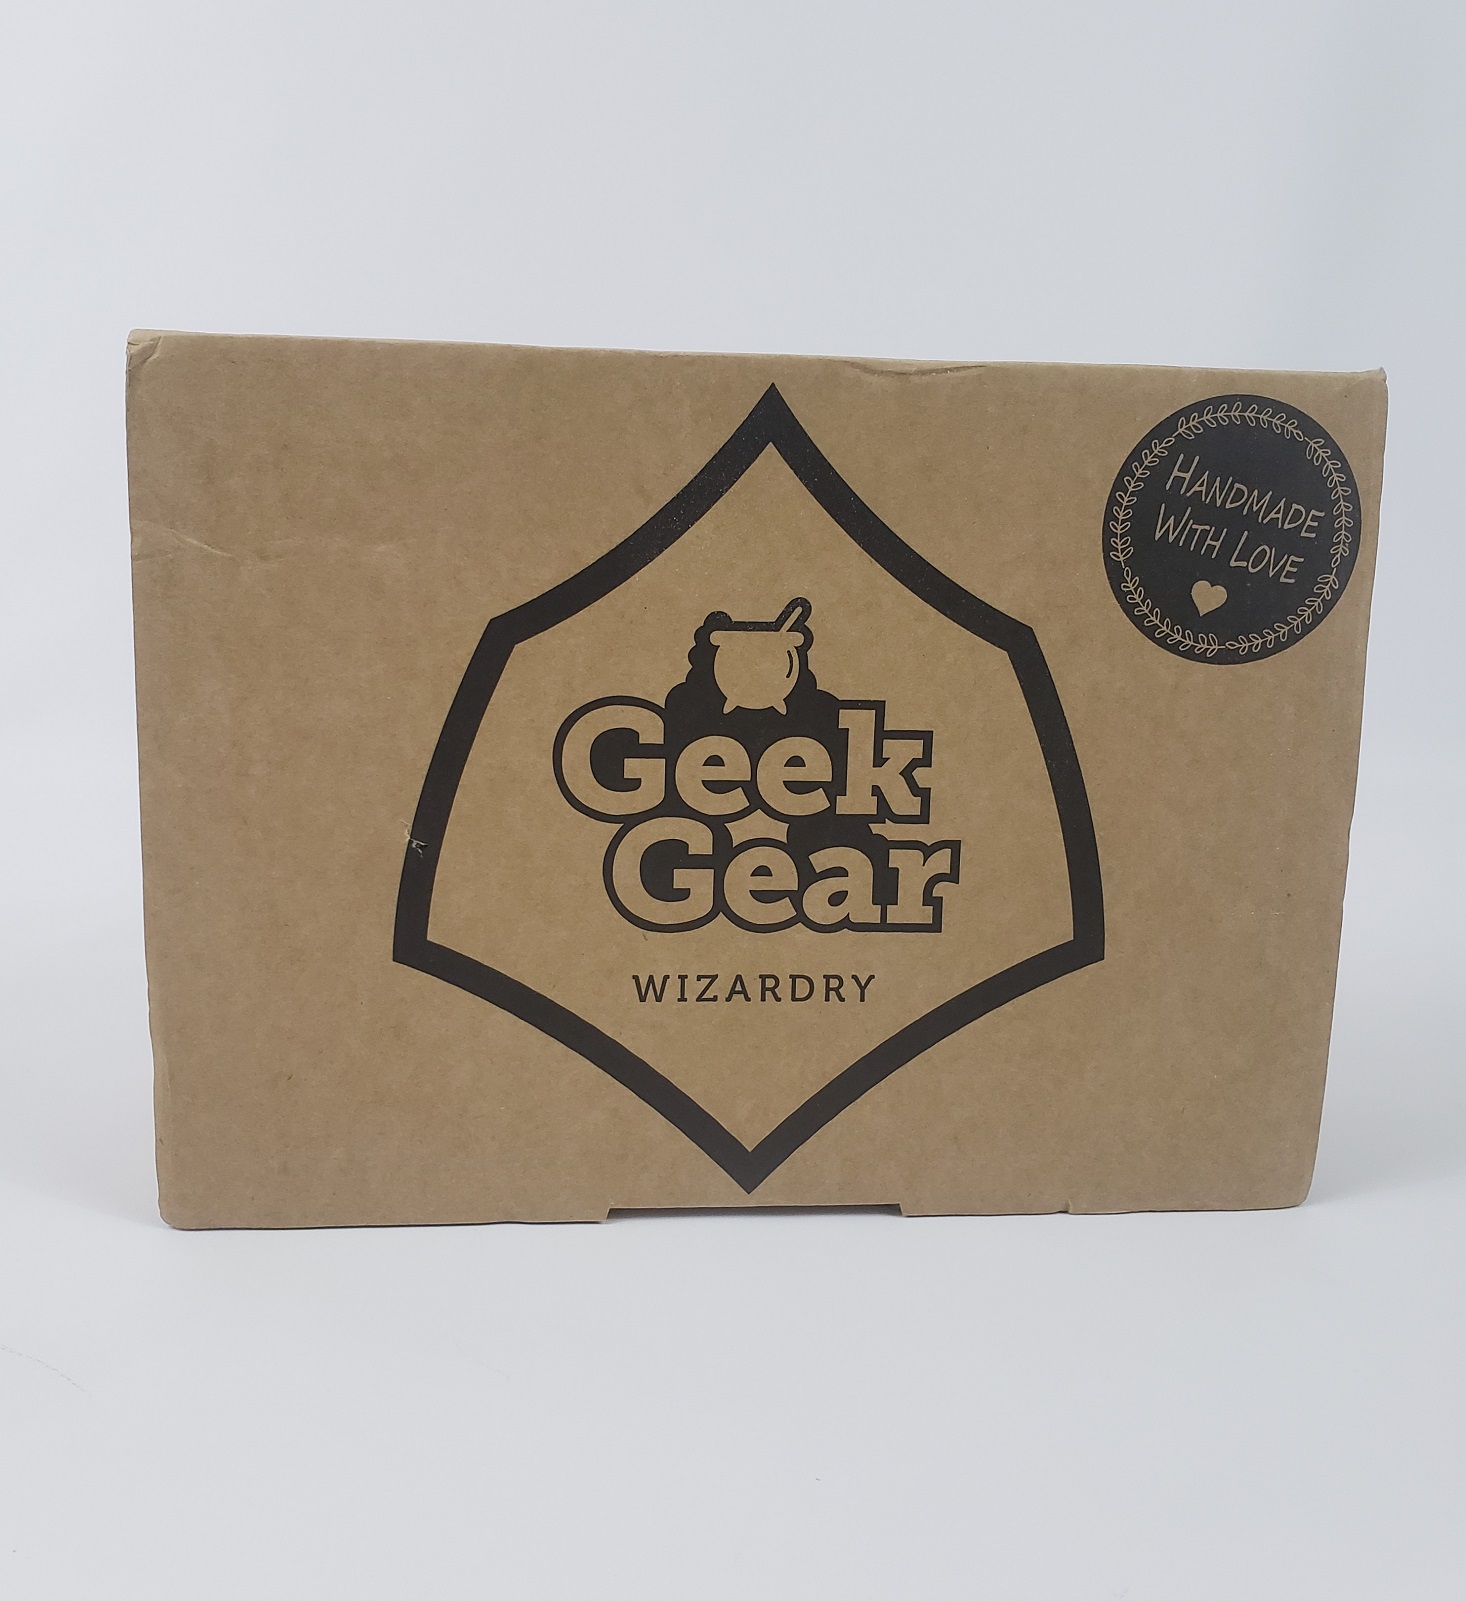 GeekGear World Of Wizardry Review + Coupon – February 2019